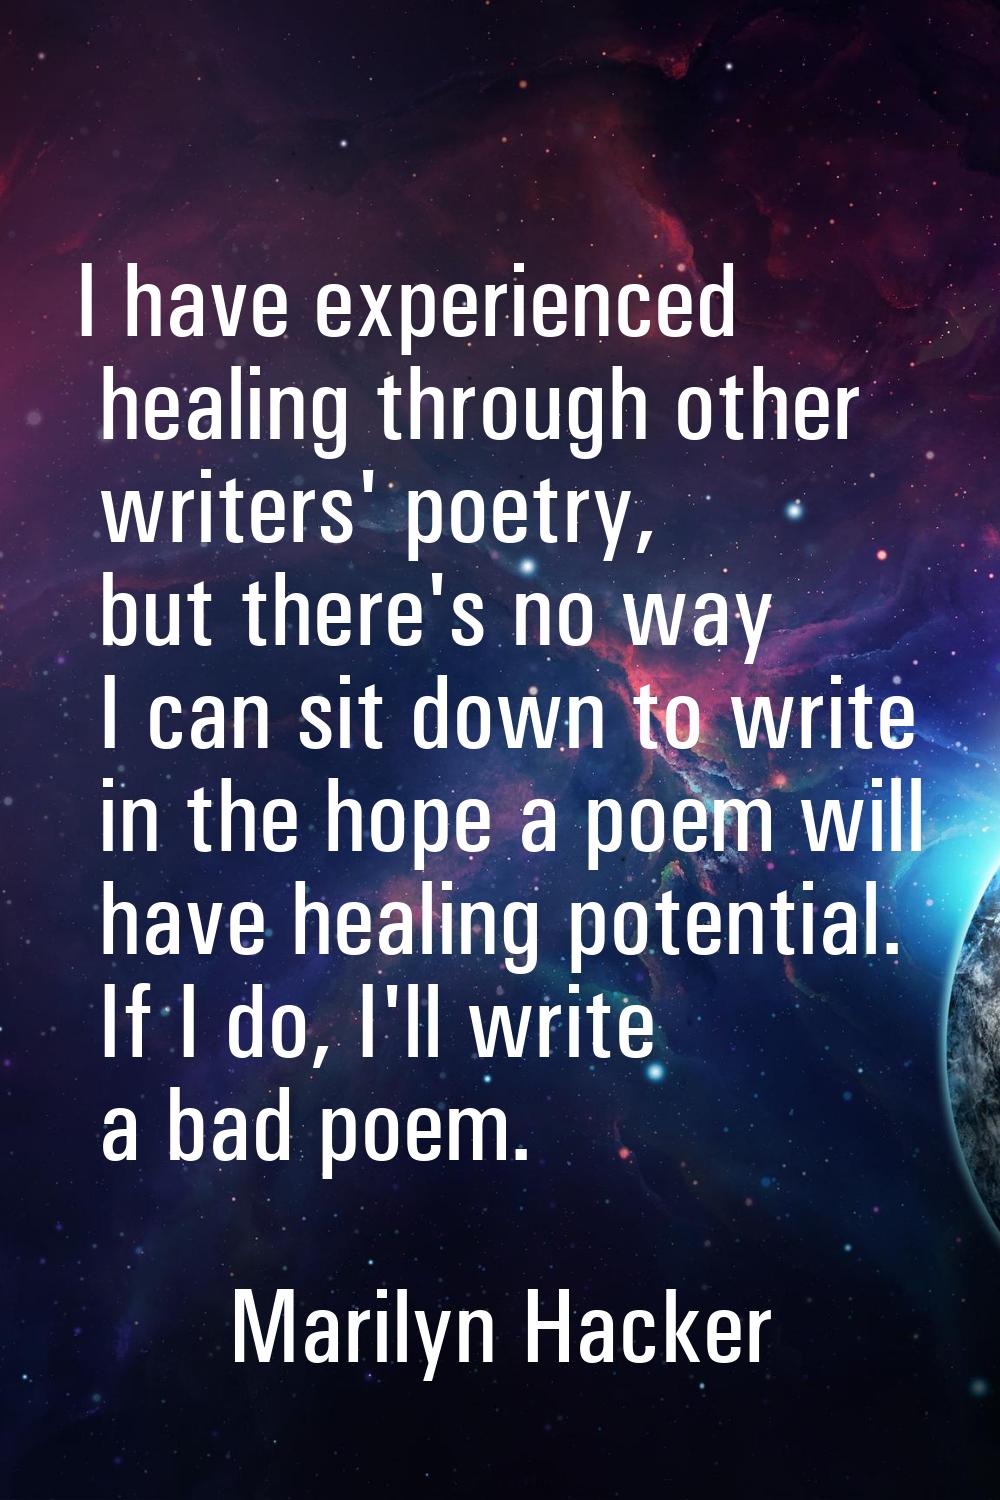 I have experienced healing through other writers' poetry, but there's no way I can sit down to writ